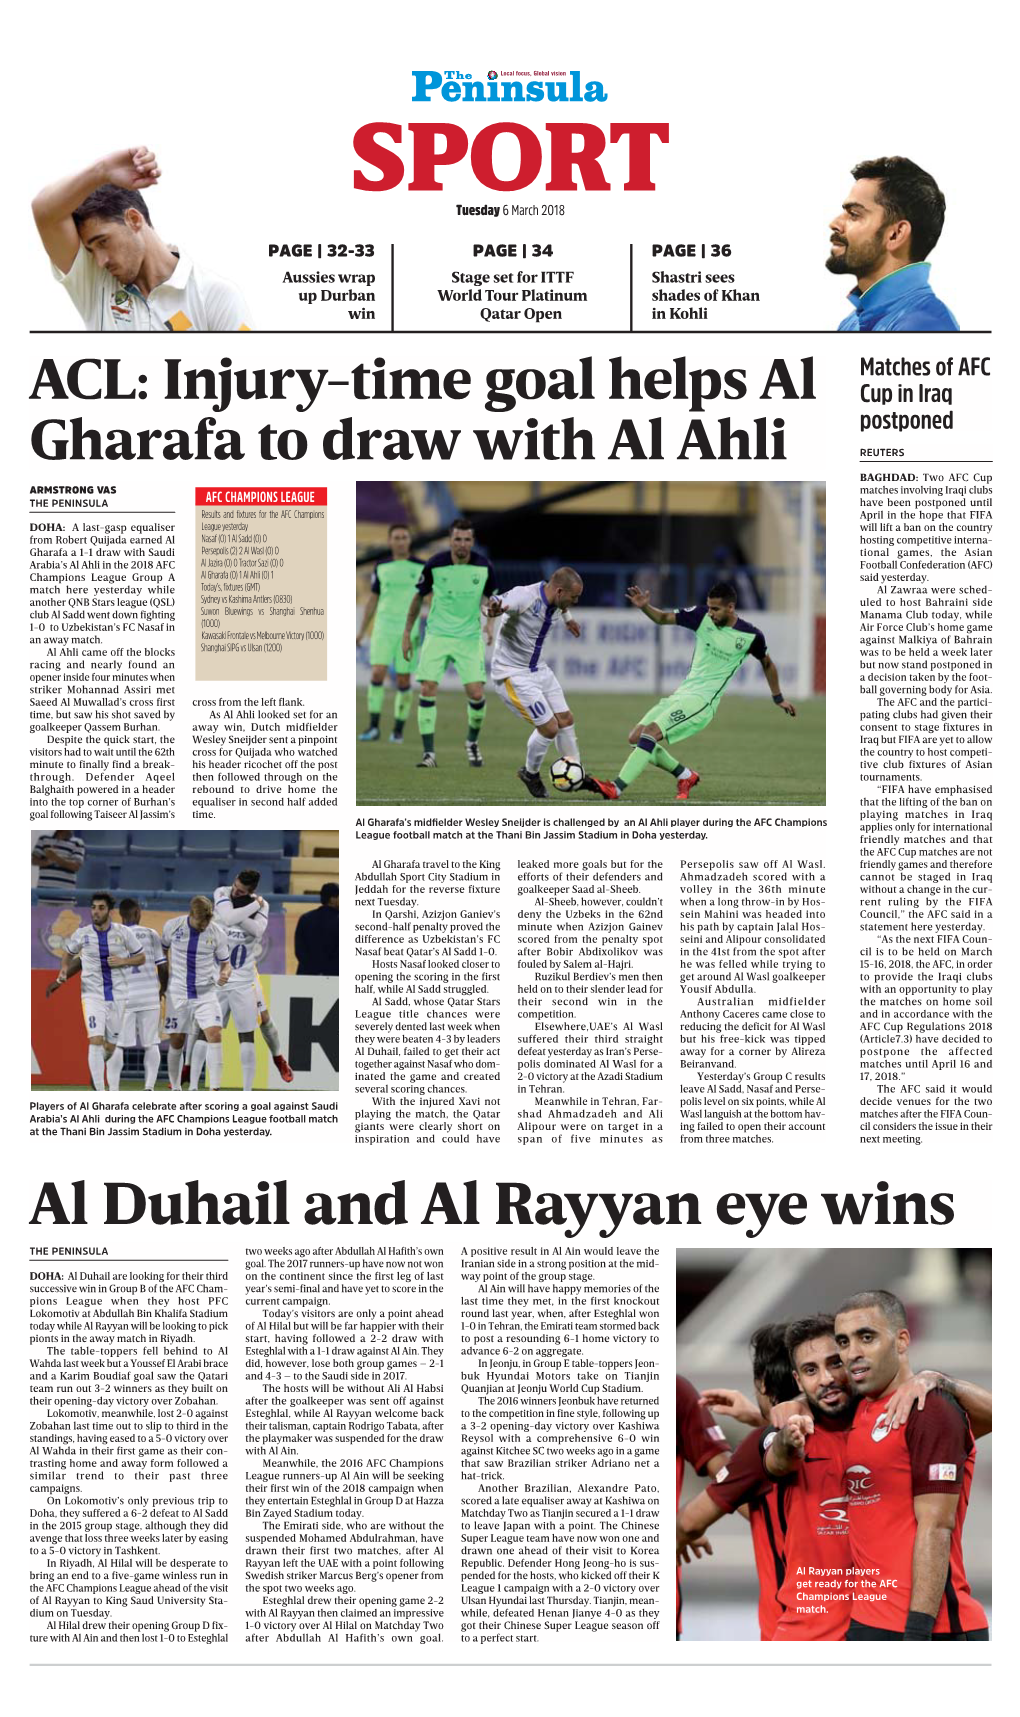 Al Duhail and Al Rayyan Eye Wins the PENINSULA Two Weeks Ago After Abdullah Al Hafith’S Own a Positive Result in Al Ain Would Leave the Goal